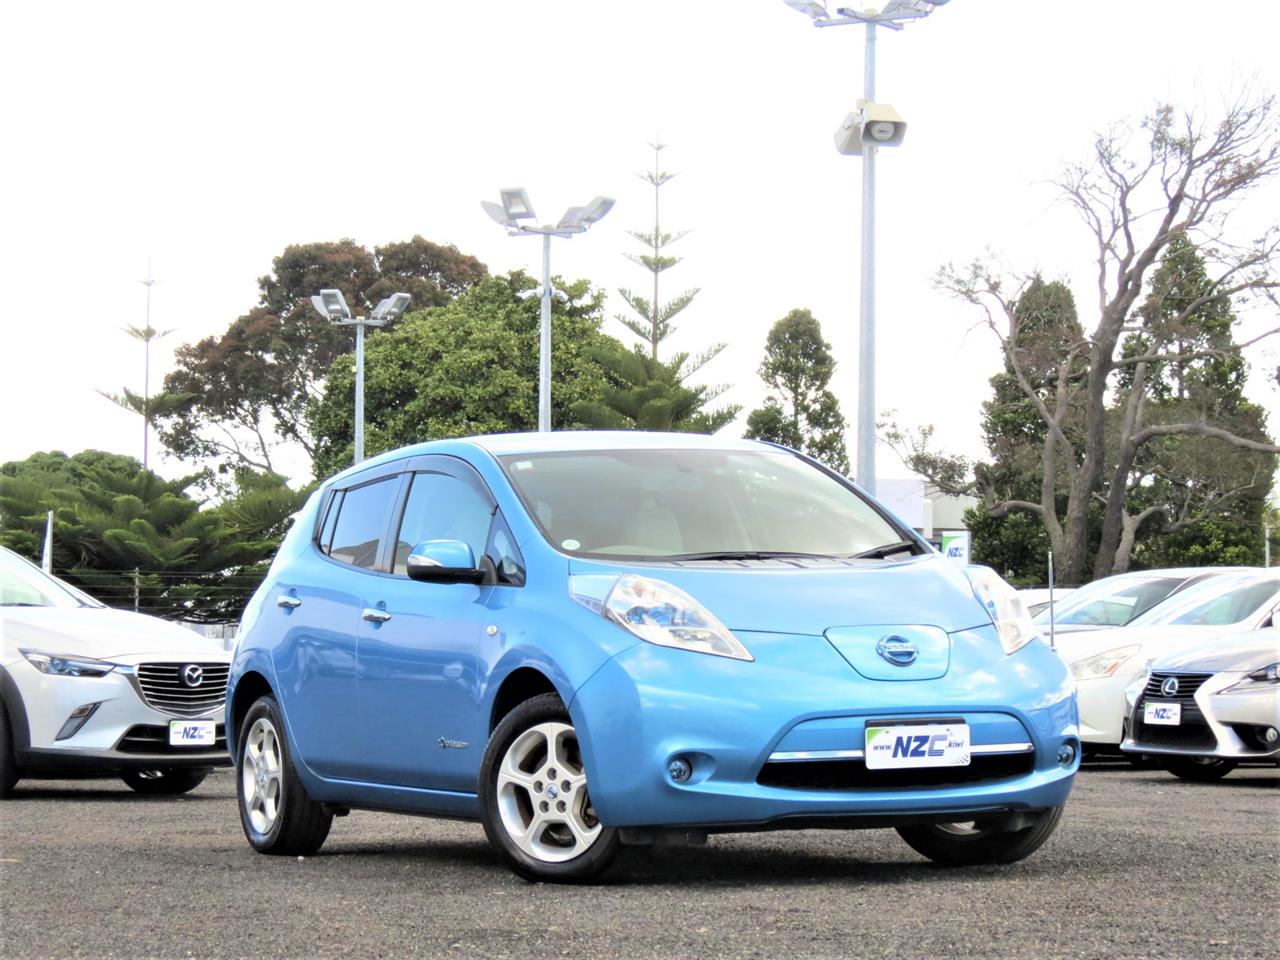 NZC best hot price for 2012 Nissan Leaf in Auckland